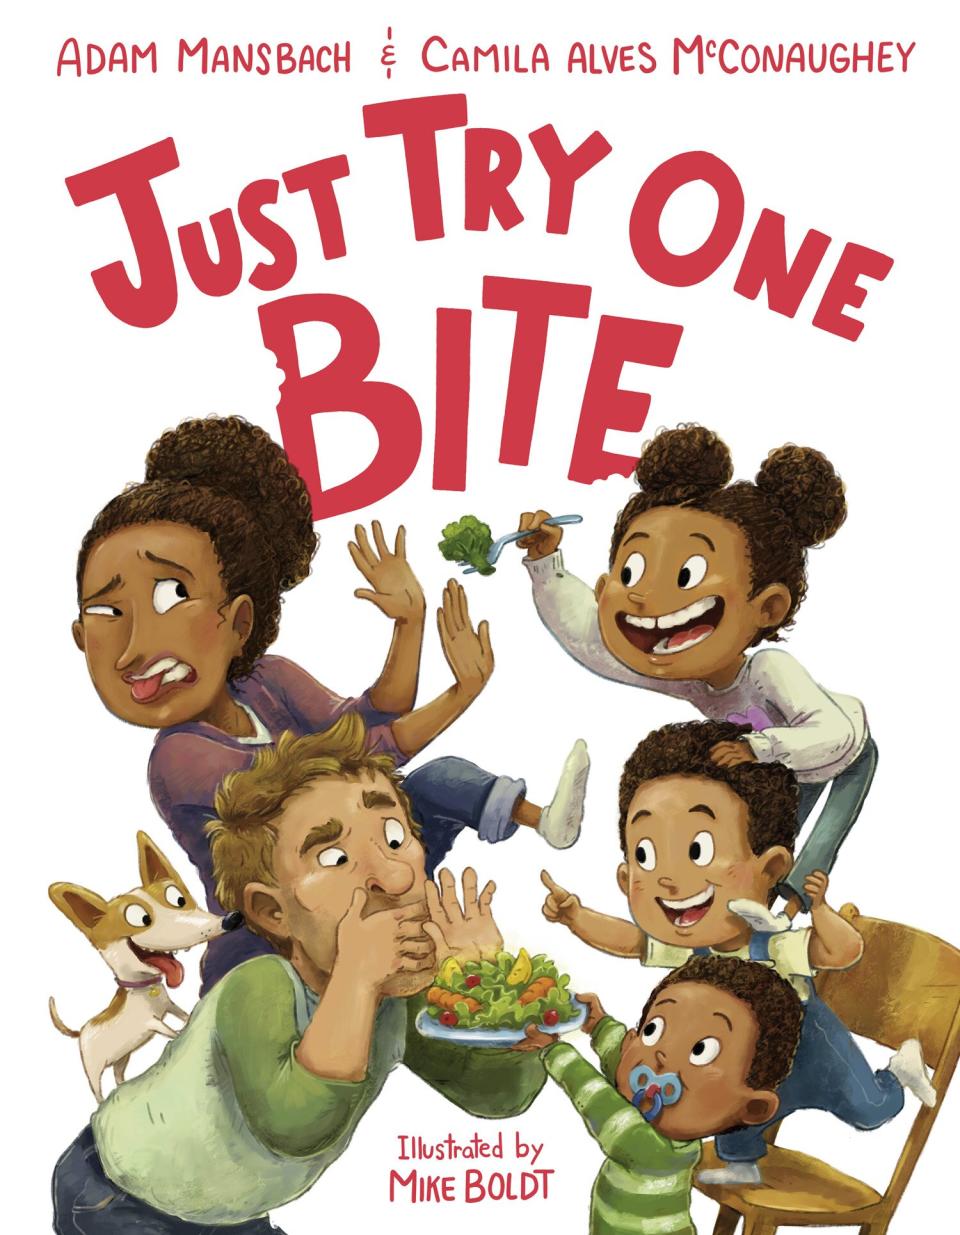 Just Try One Bite By ADAM MANSBACH and CAMILA ALVES MCCONAUGHEY Illustrated by MIKE BOLDT